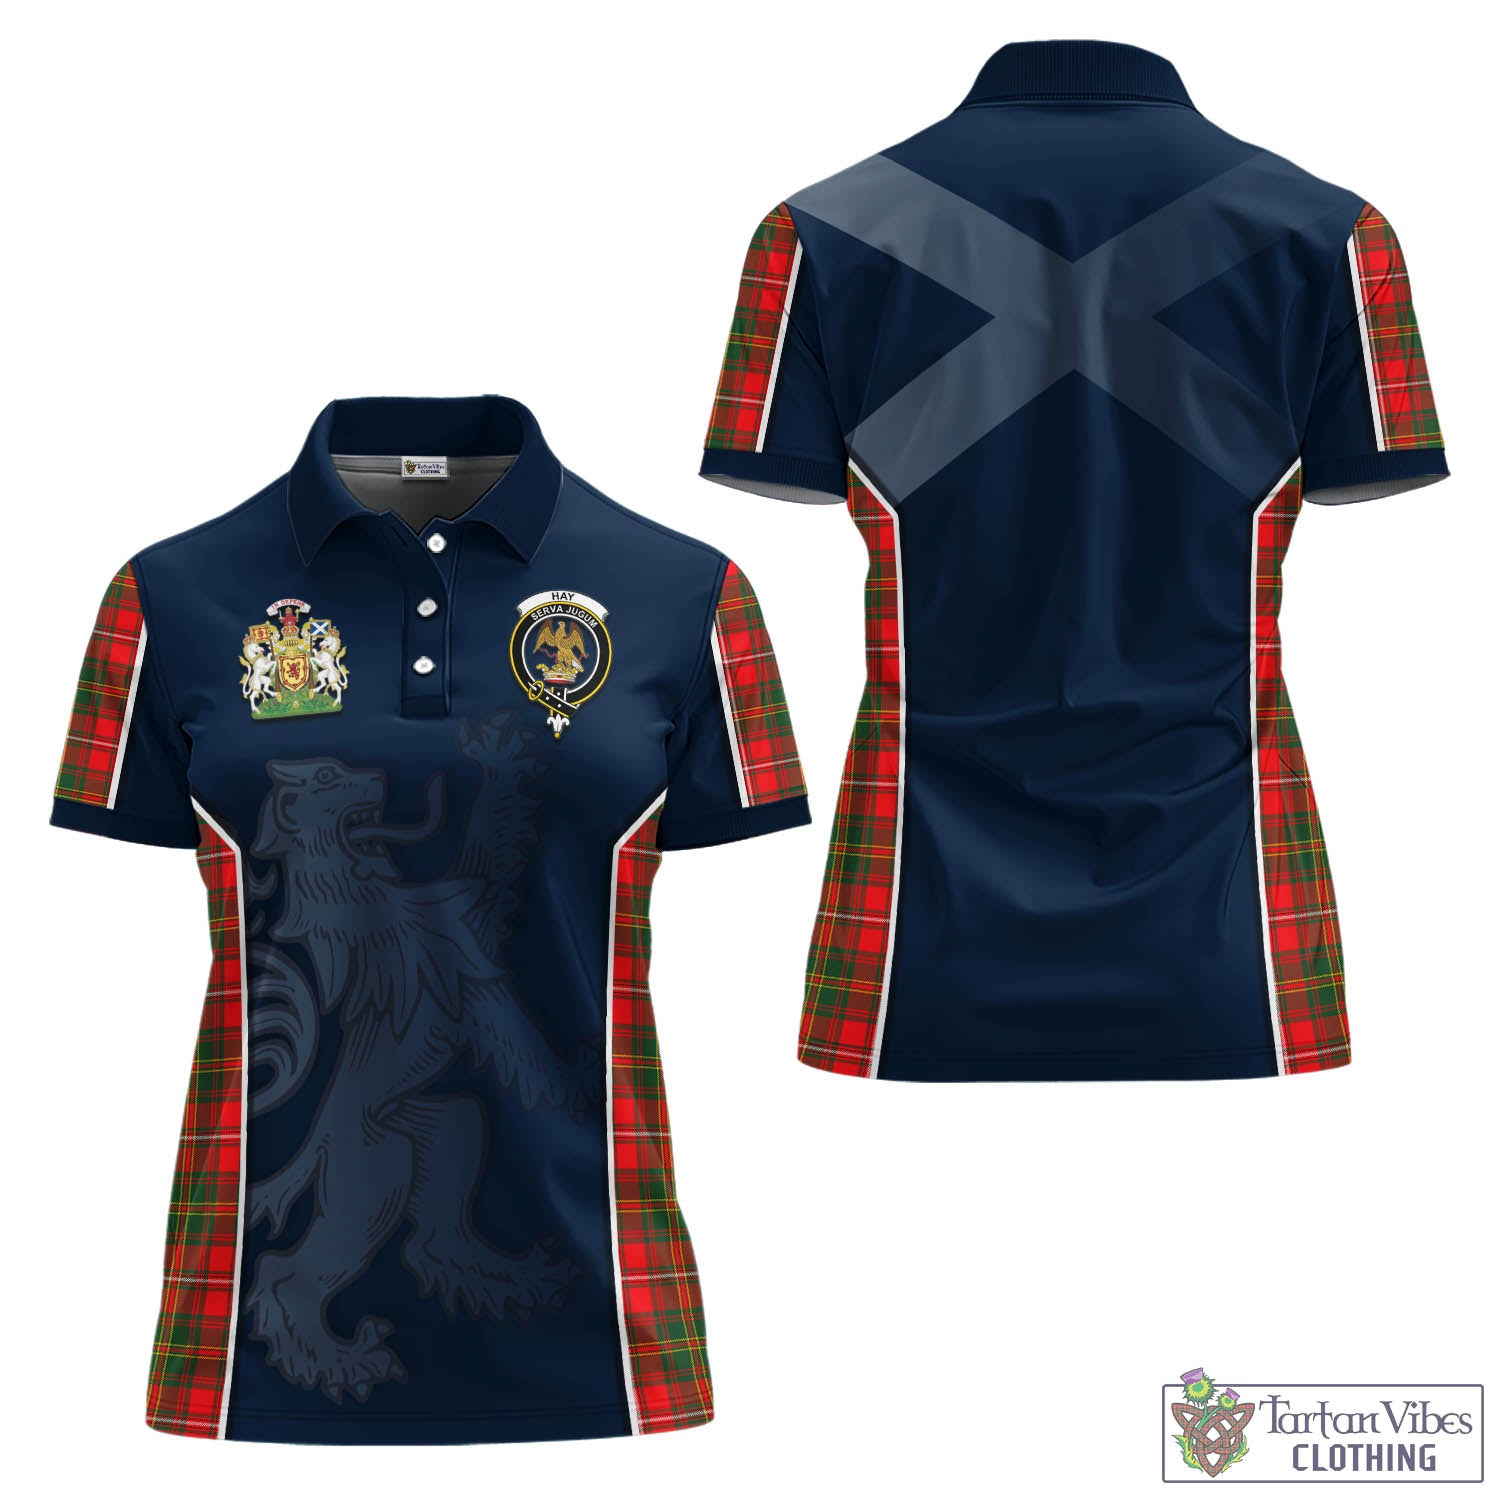 Tartan Vibes Clothing Hay Modern Tartan Women's Polo Shirt with Family Crest and Lion Rampant Vibes Sport Style